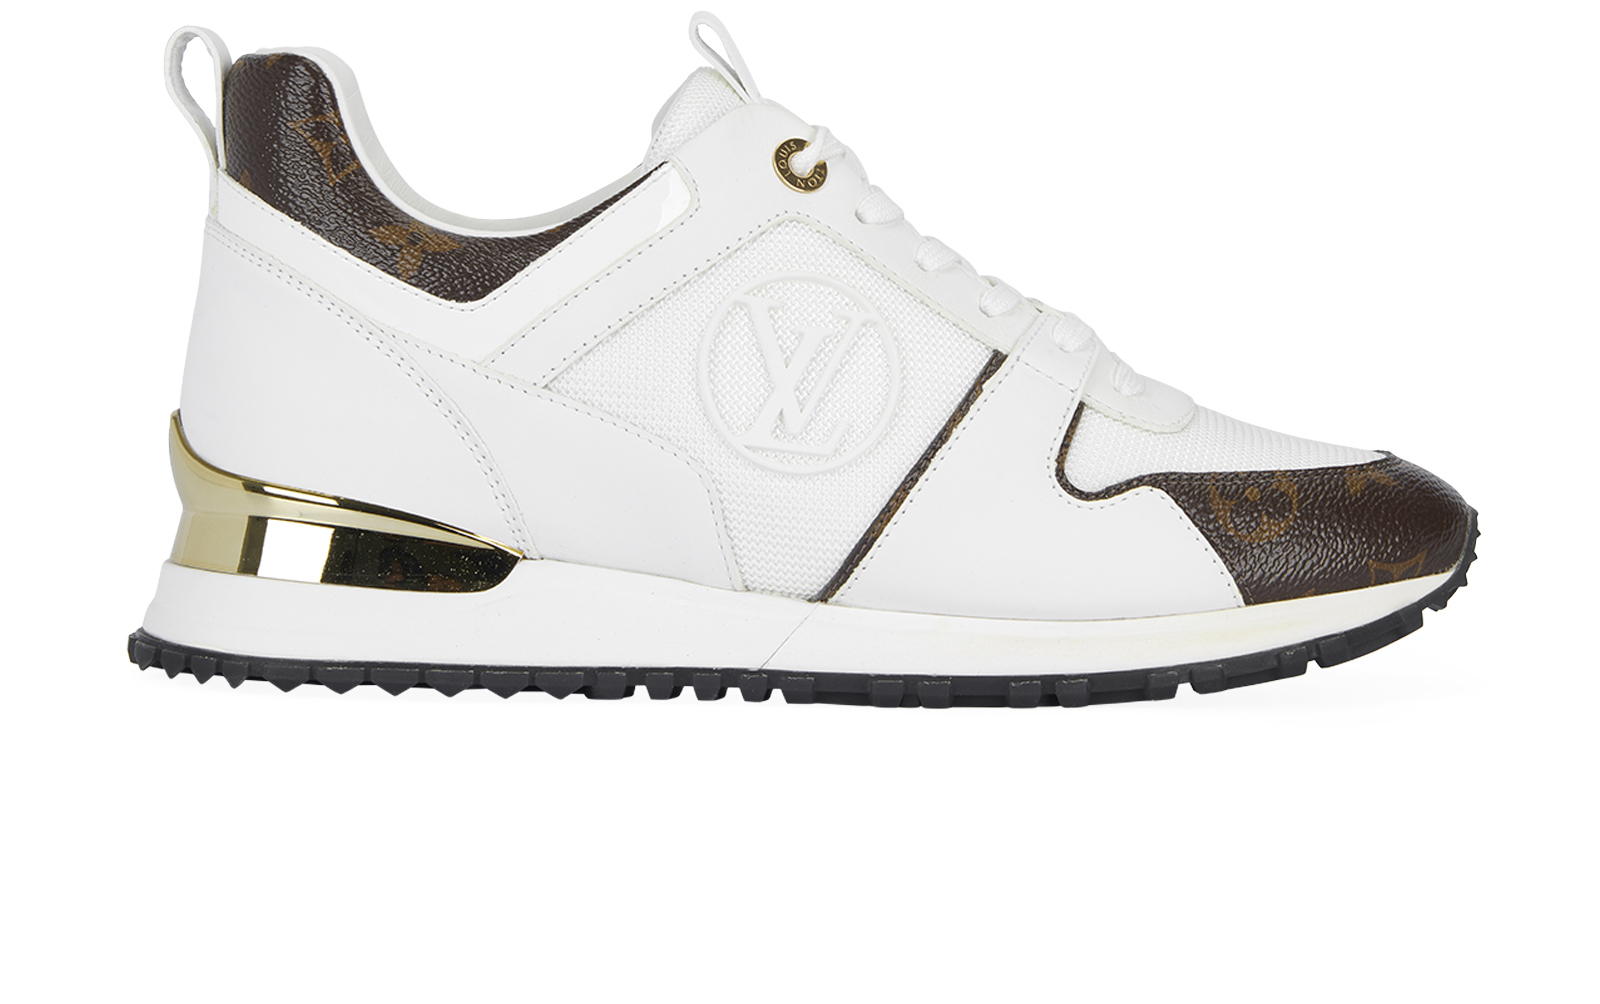 Louis Vuitton Run Away Trainers. White/Gold Leather, Trainers